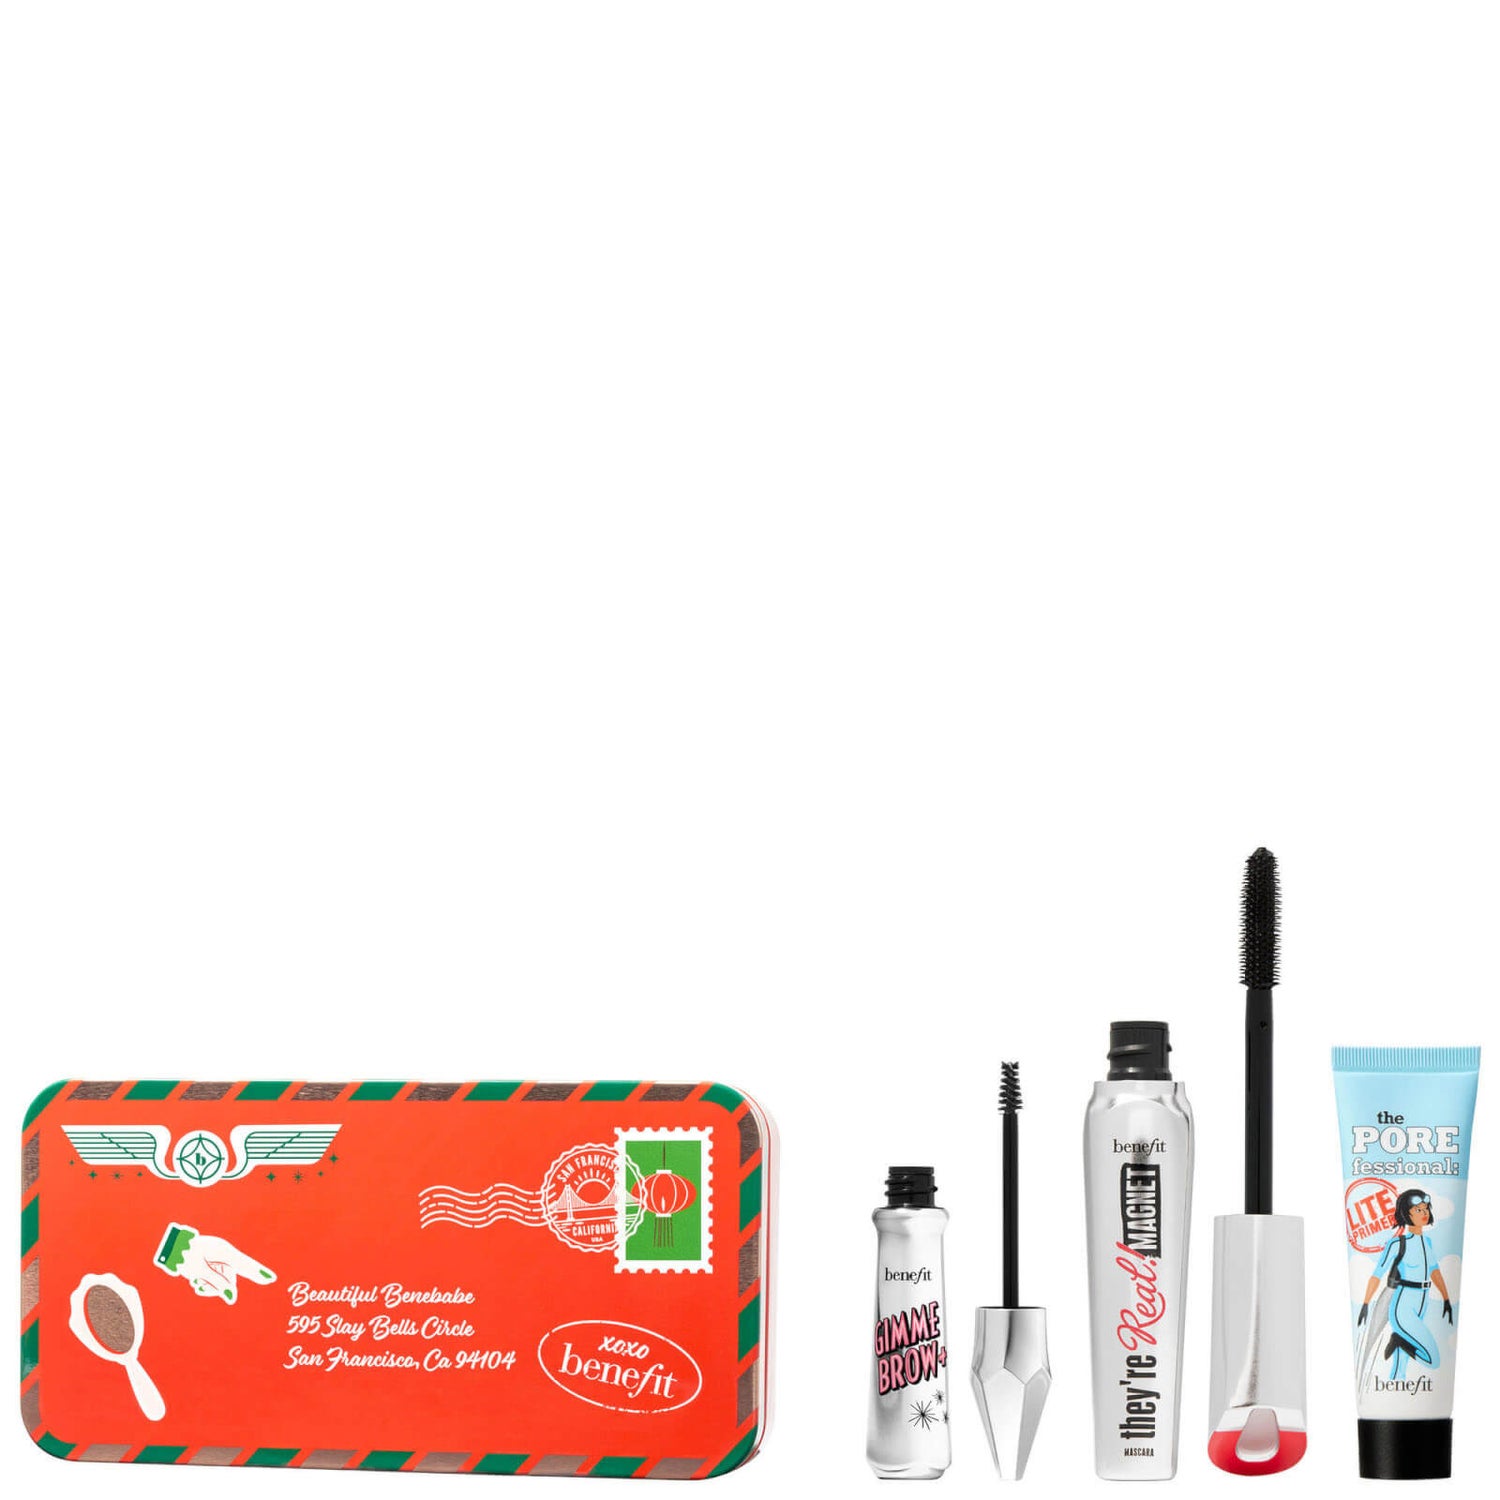 benefit Stamp of Beauty Eyebrow Gel, Mascara and Primer Gift Set (Worth £60.50)